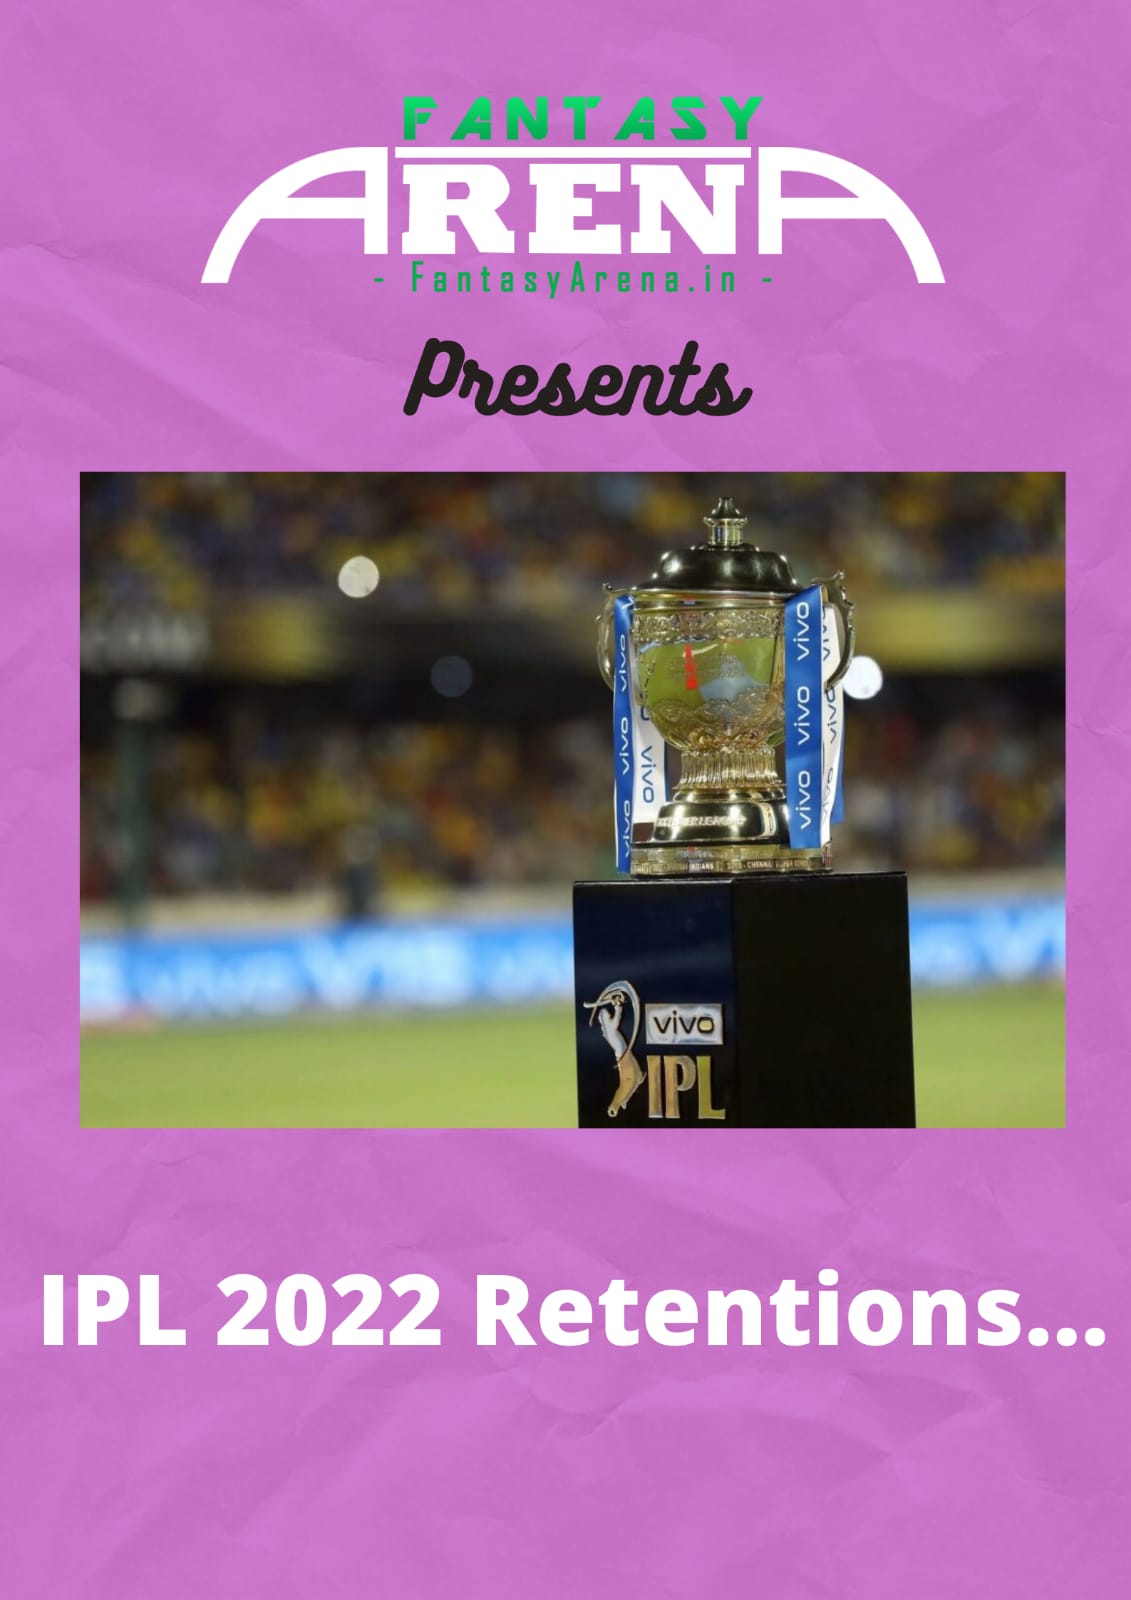 All you need to know about IPL 2022 Retentions.